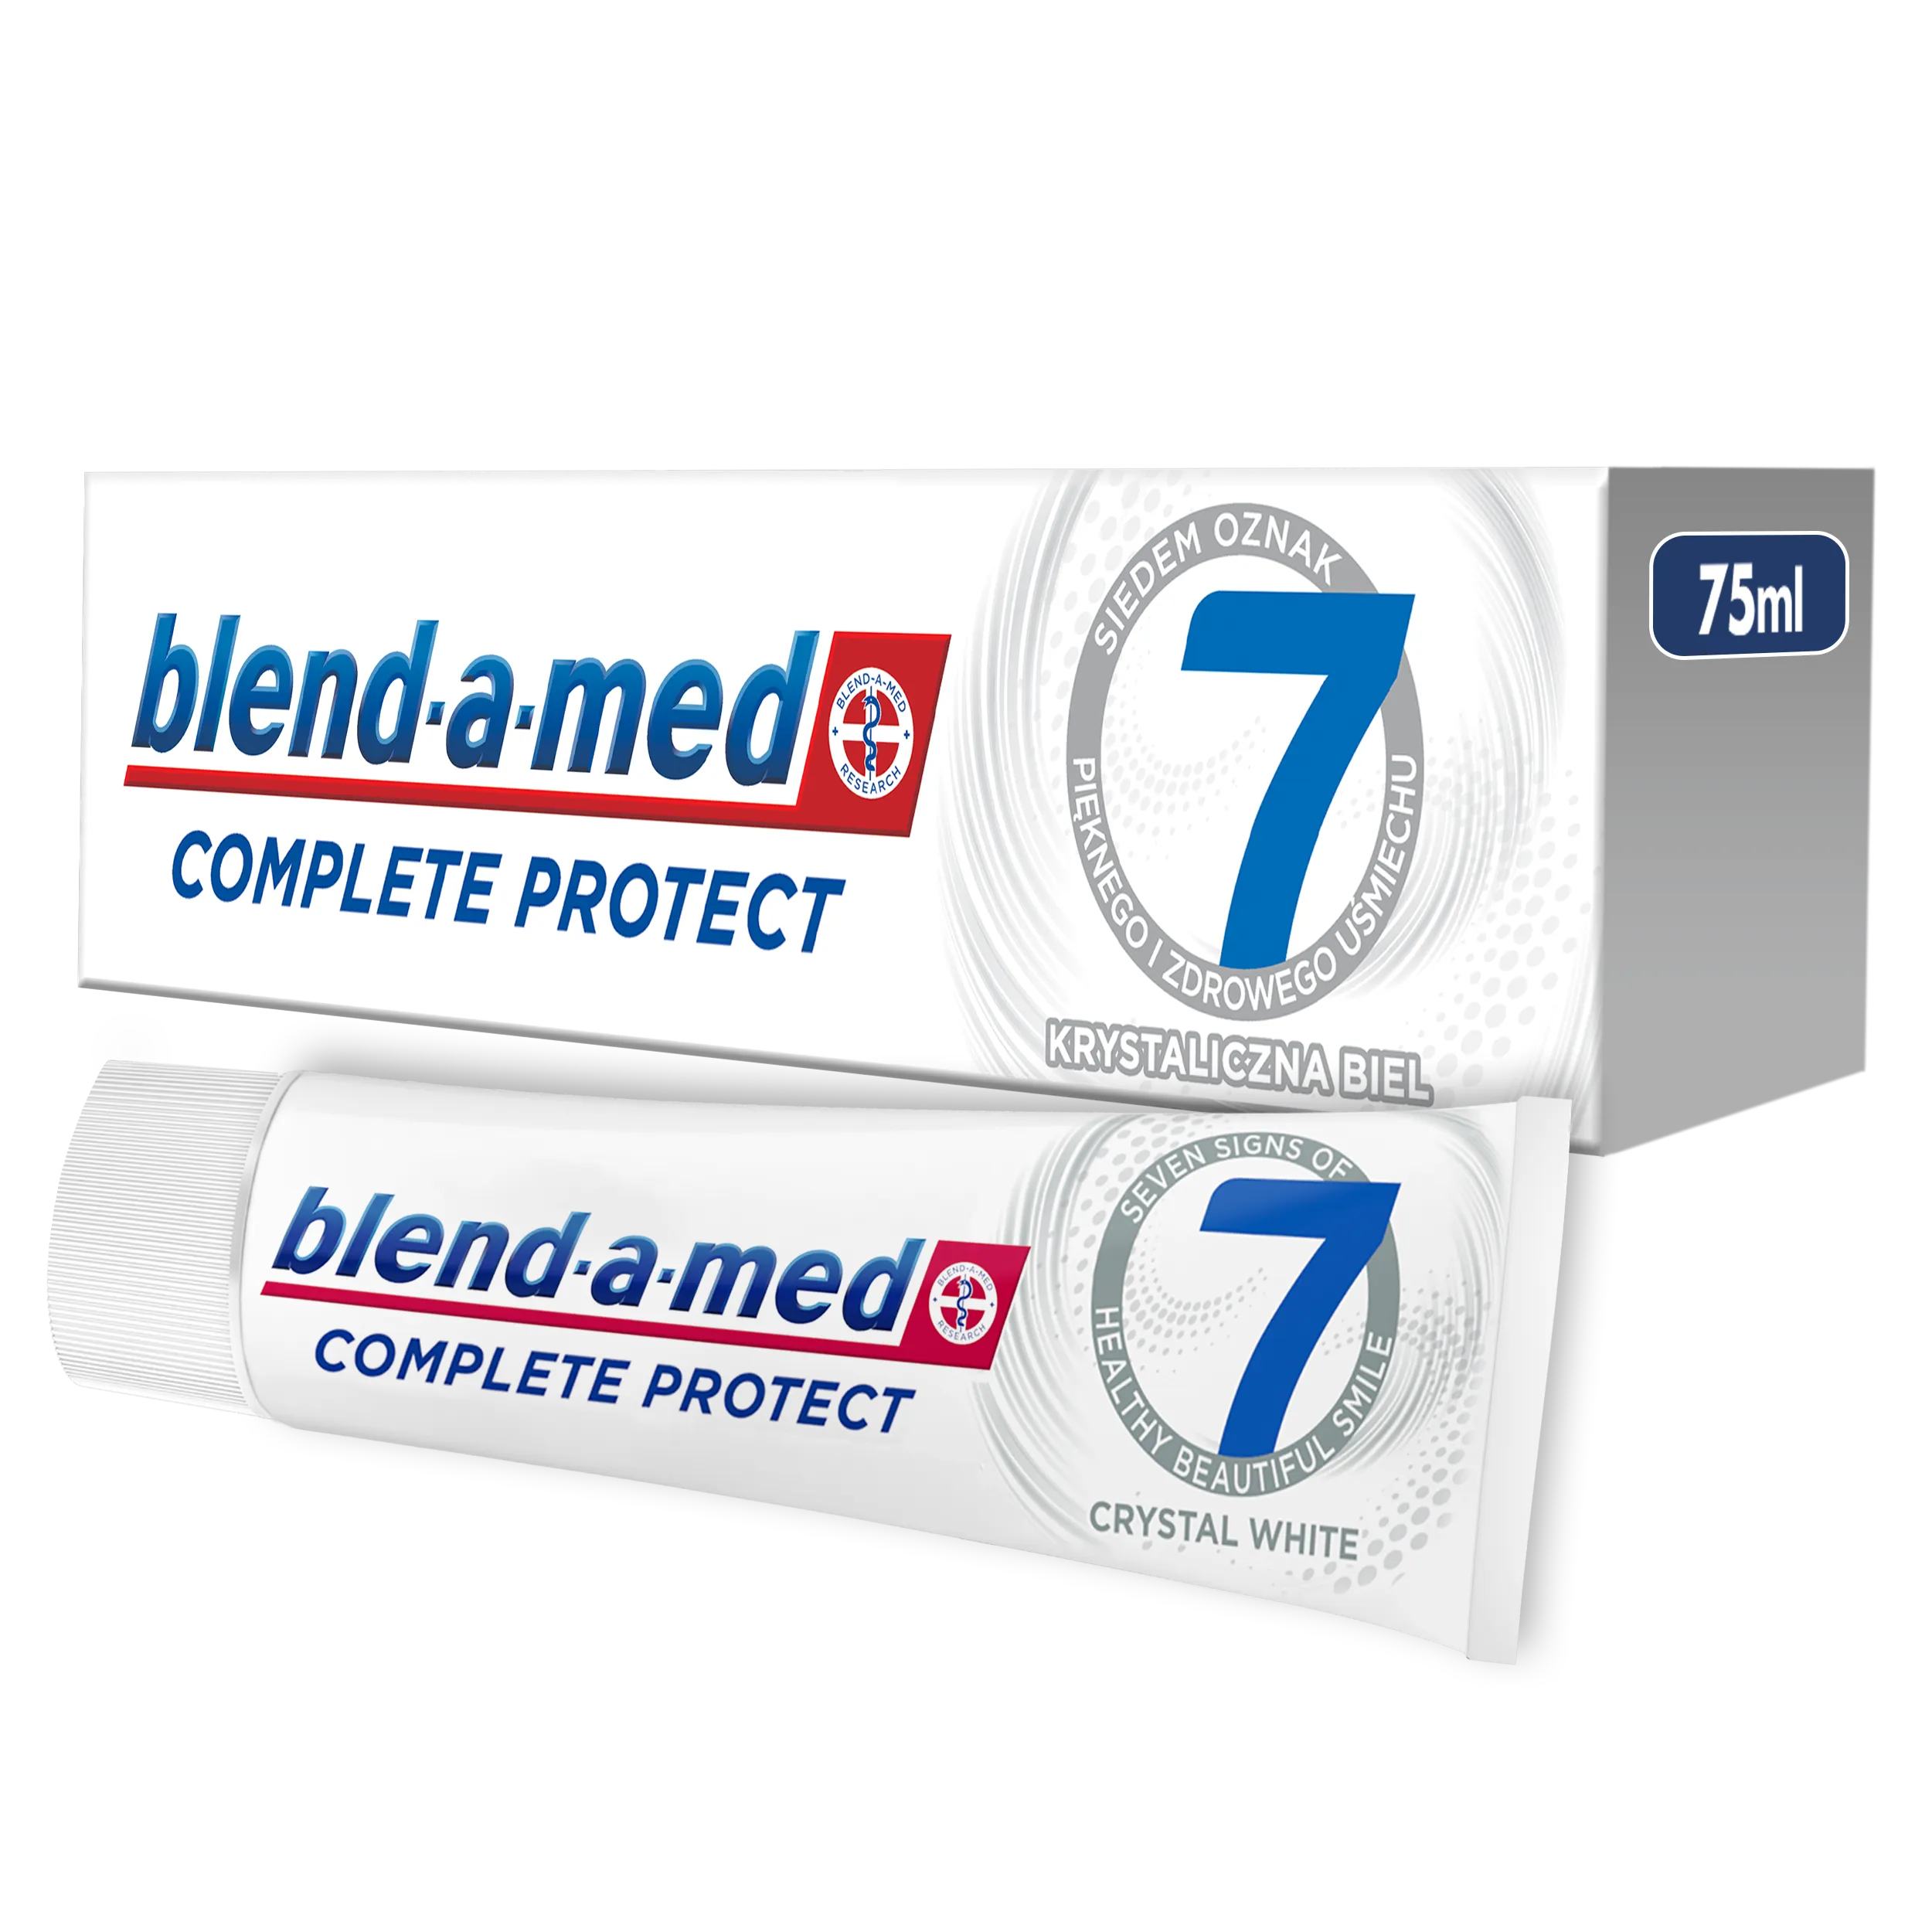 Blend-a-med Complete Protect 7 Cristal White pasta do zębów, 75 ml